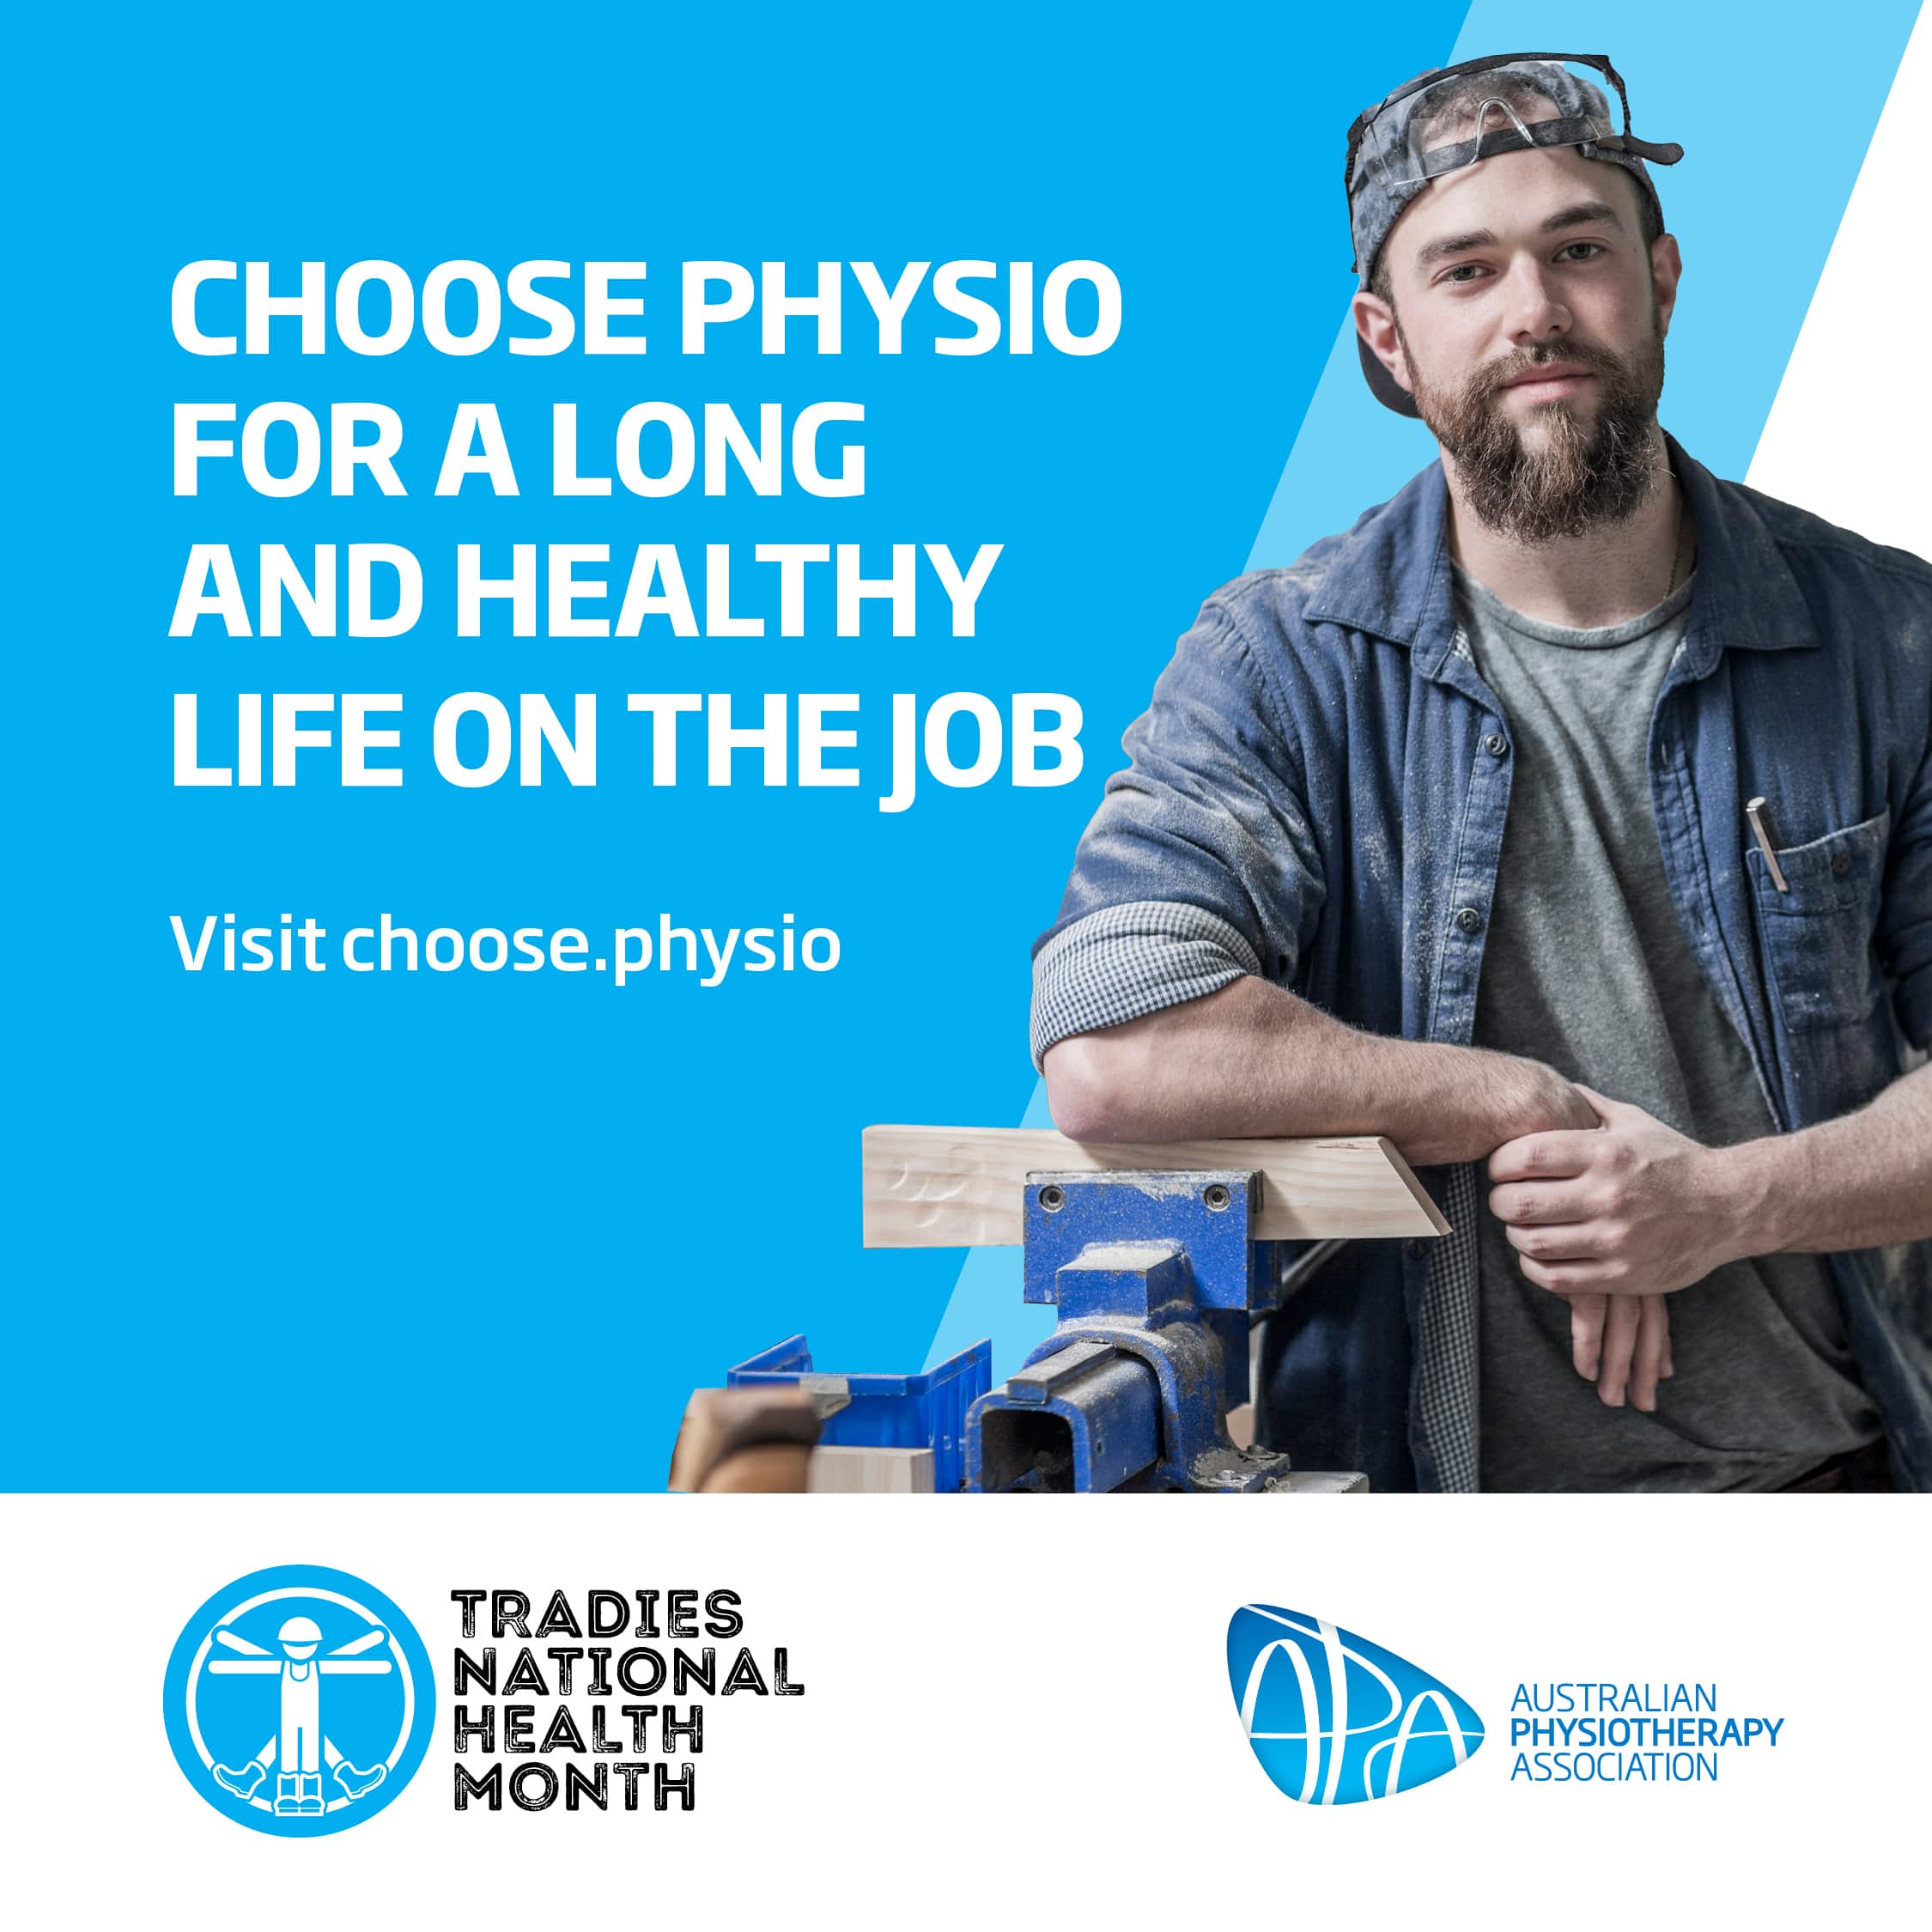 Choose Physio for a Long and Healthy Life on the Job